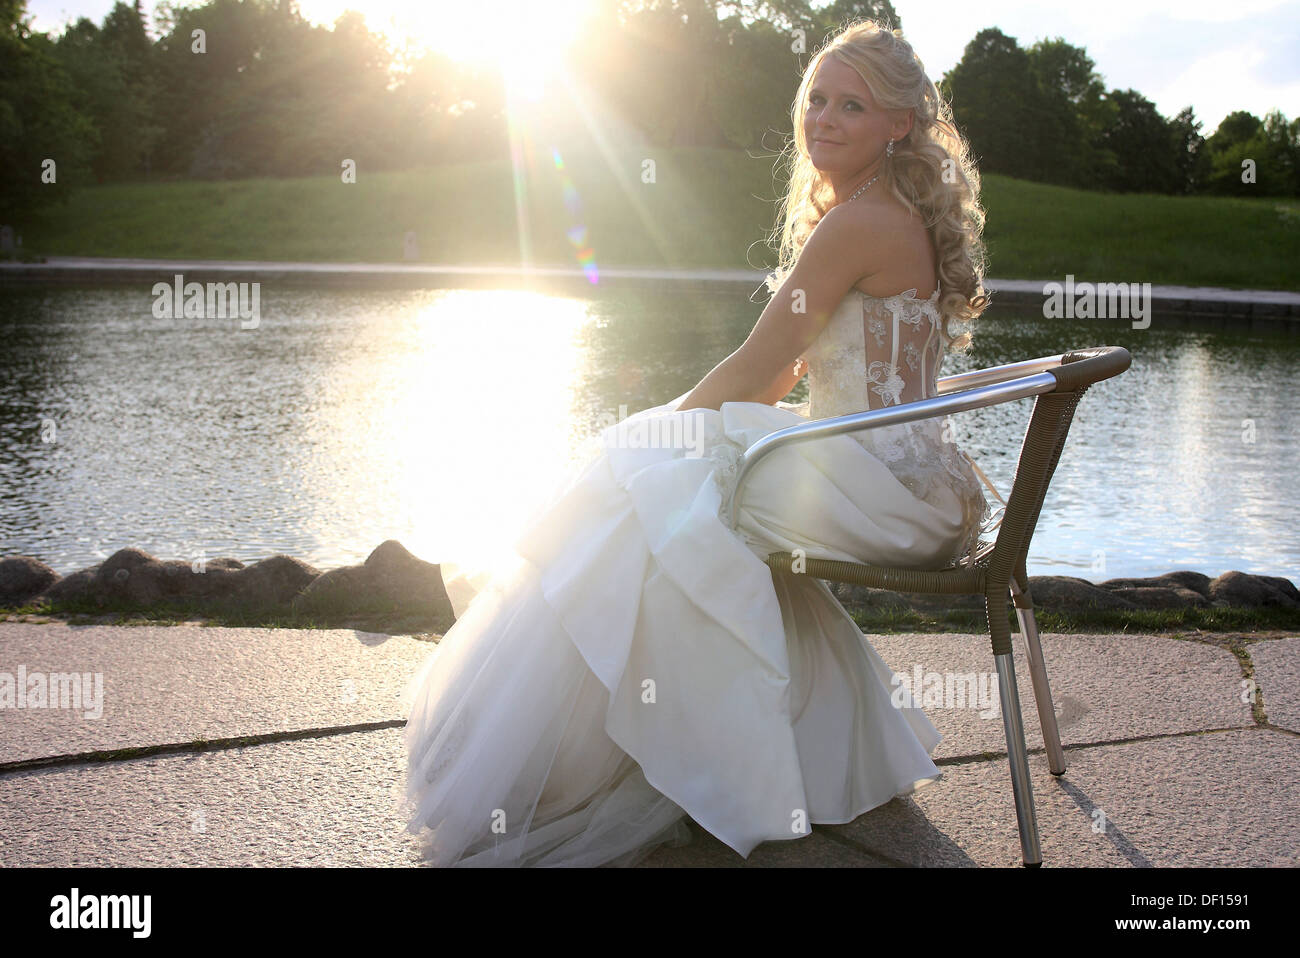 Berlin, Germany, a bride in wedding dress on the lake Stock Photo